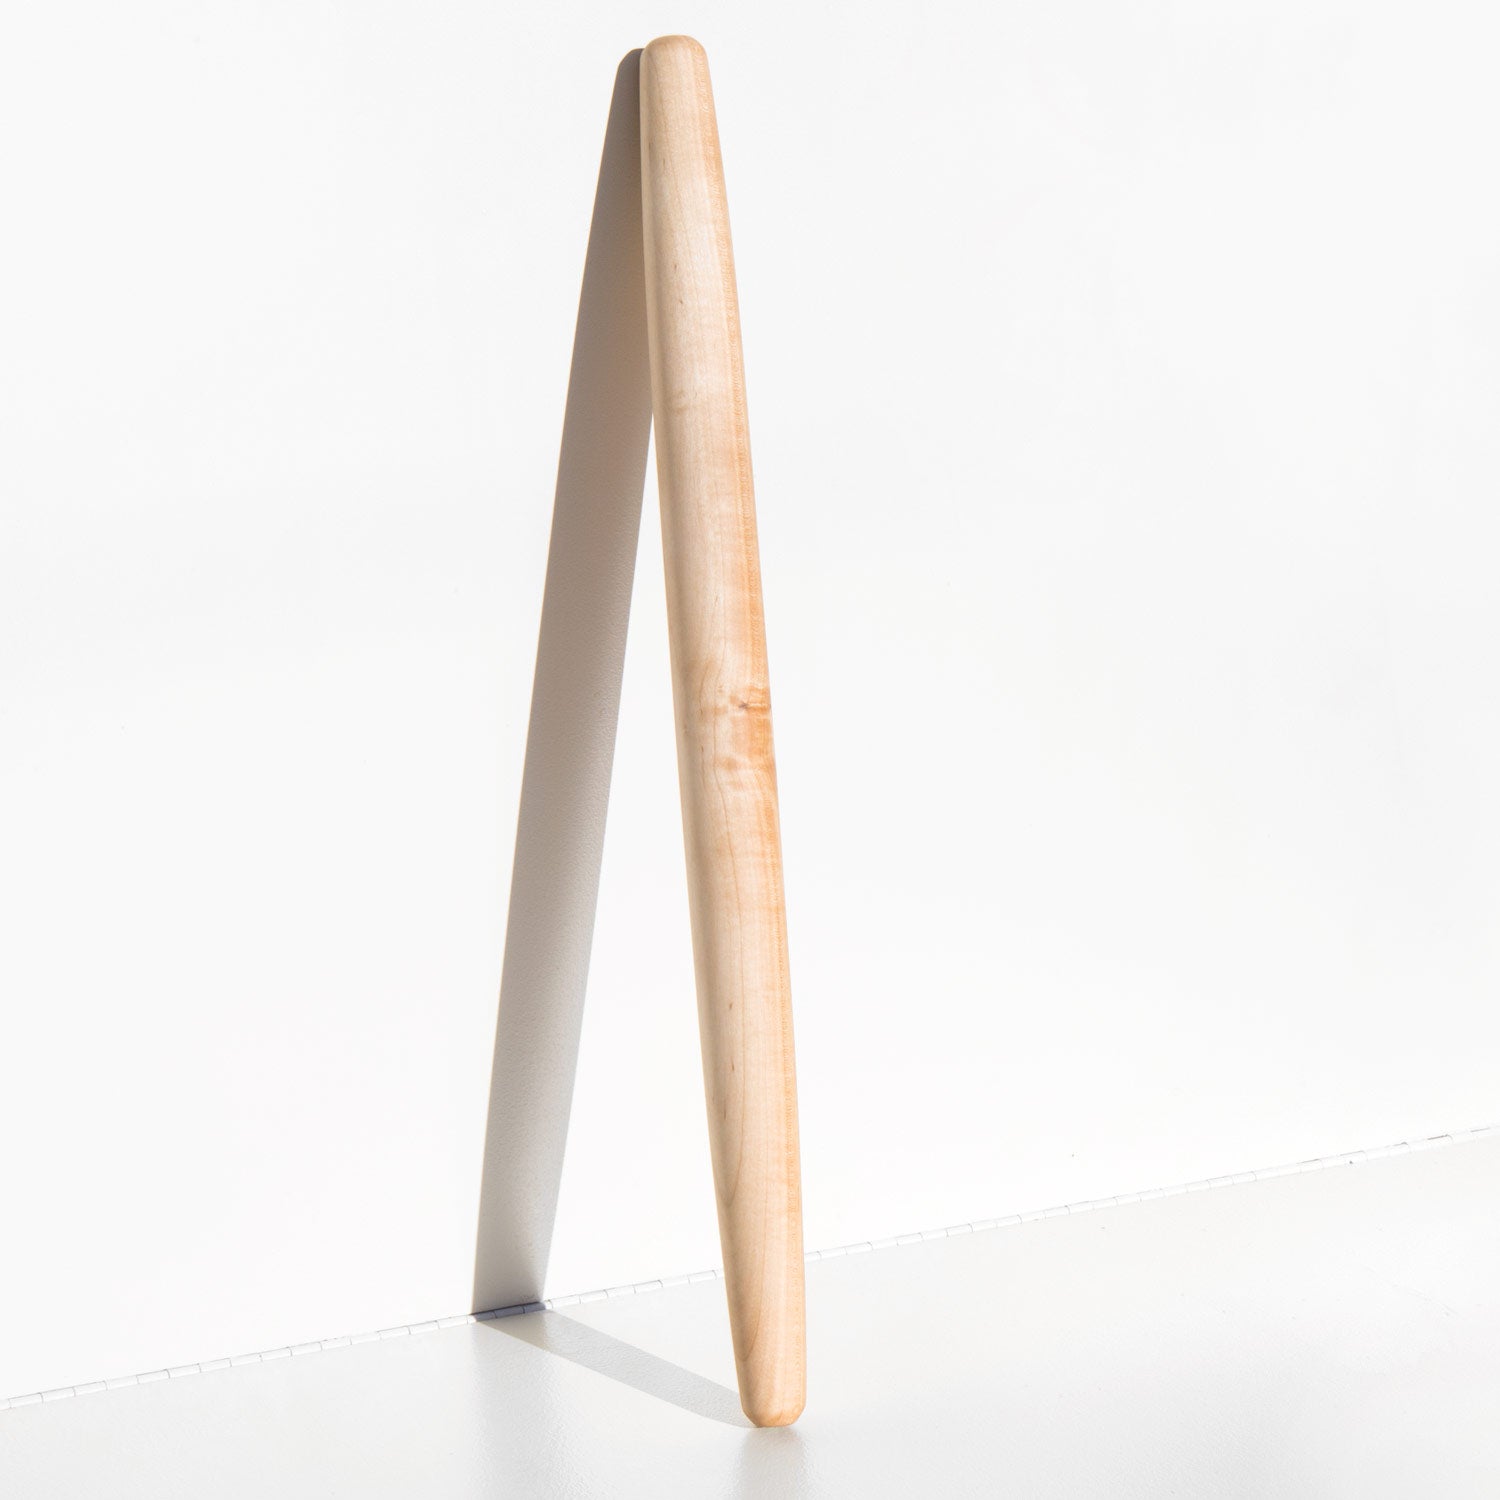 Mod Tribe Design Ambrosia Maple French Rolling Pin